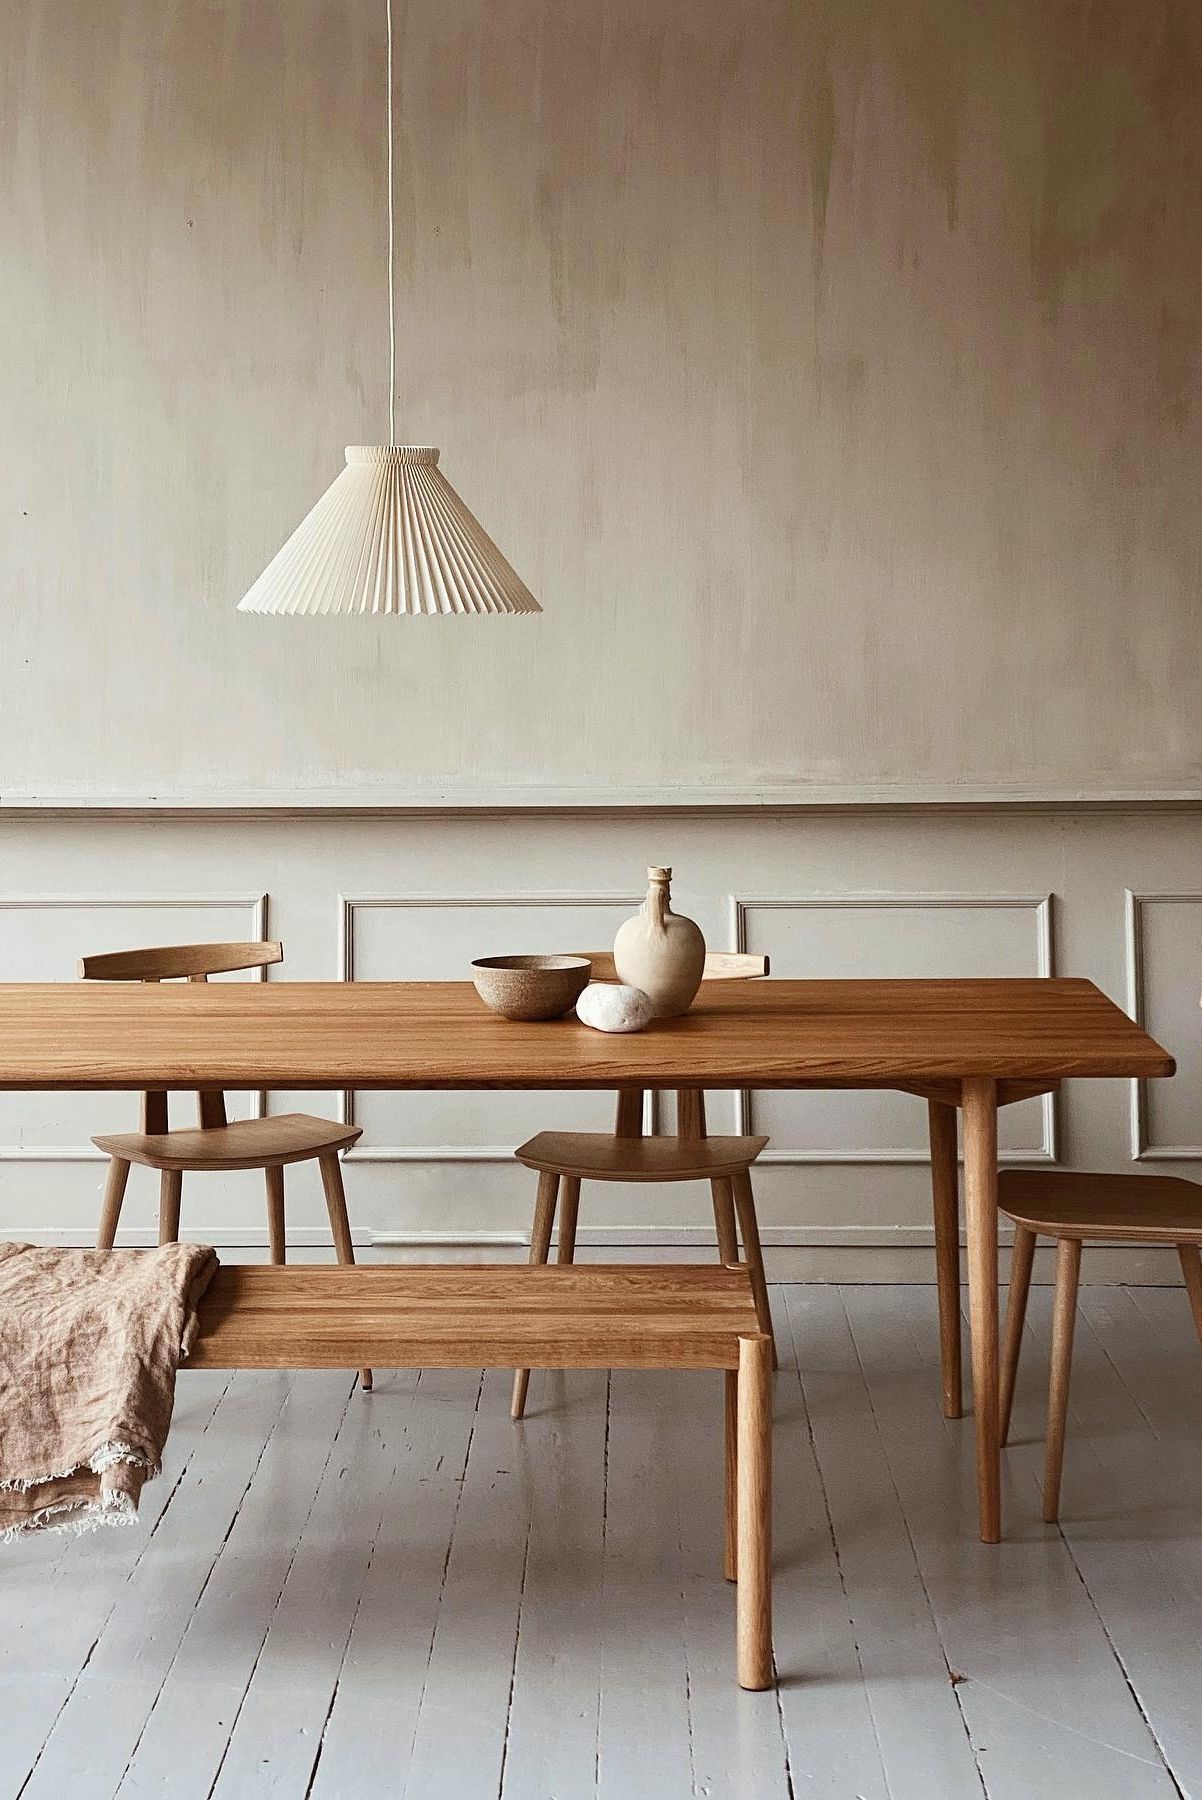 A Complete Guide to Choosing the Perfect
Dining Room Table and Chairs